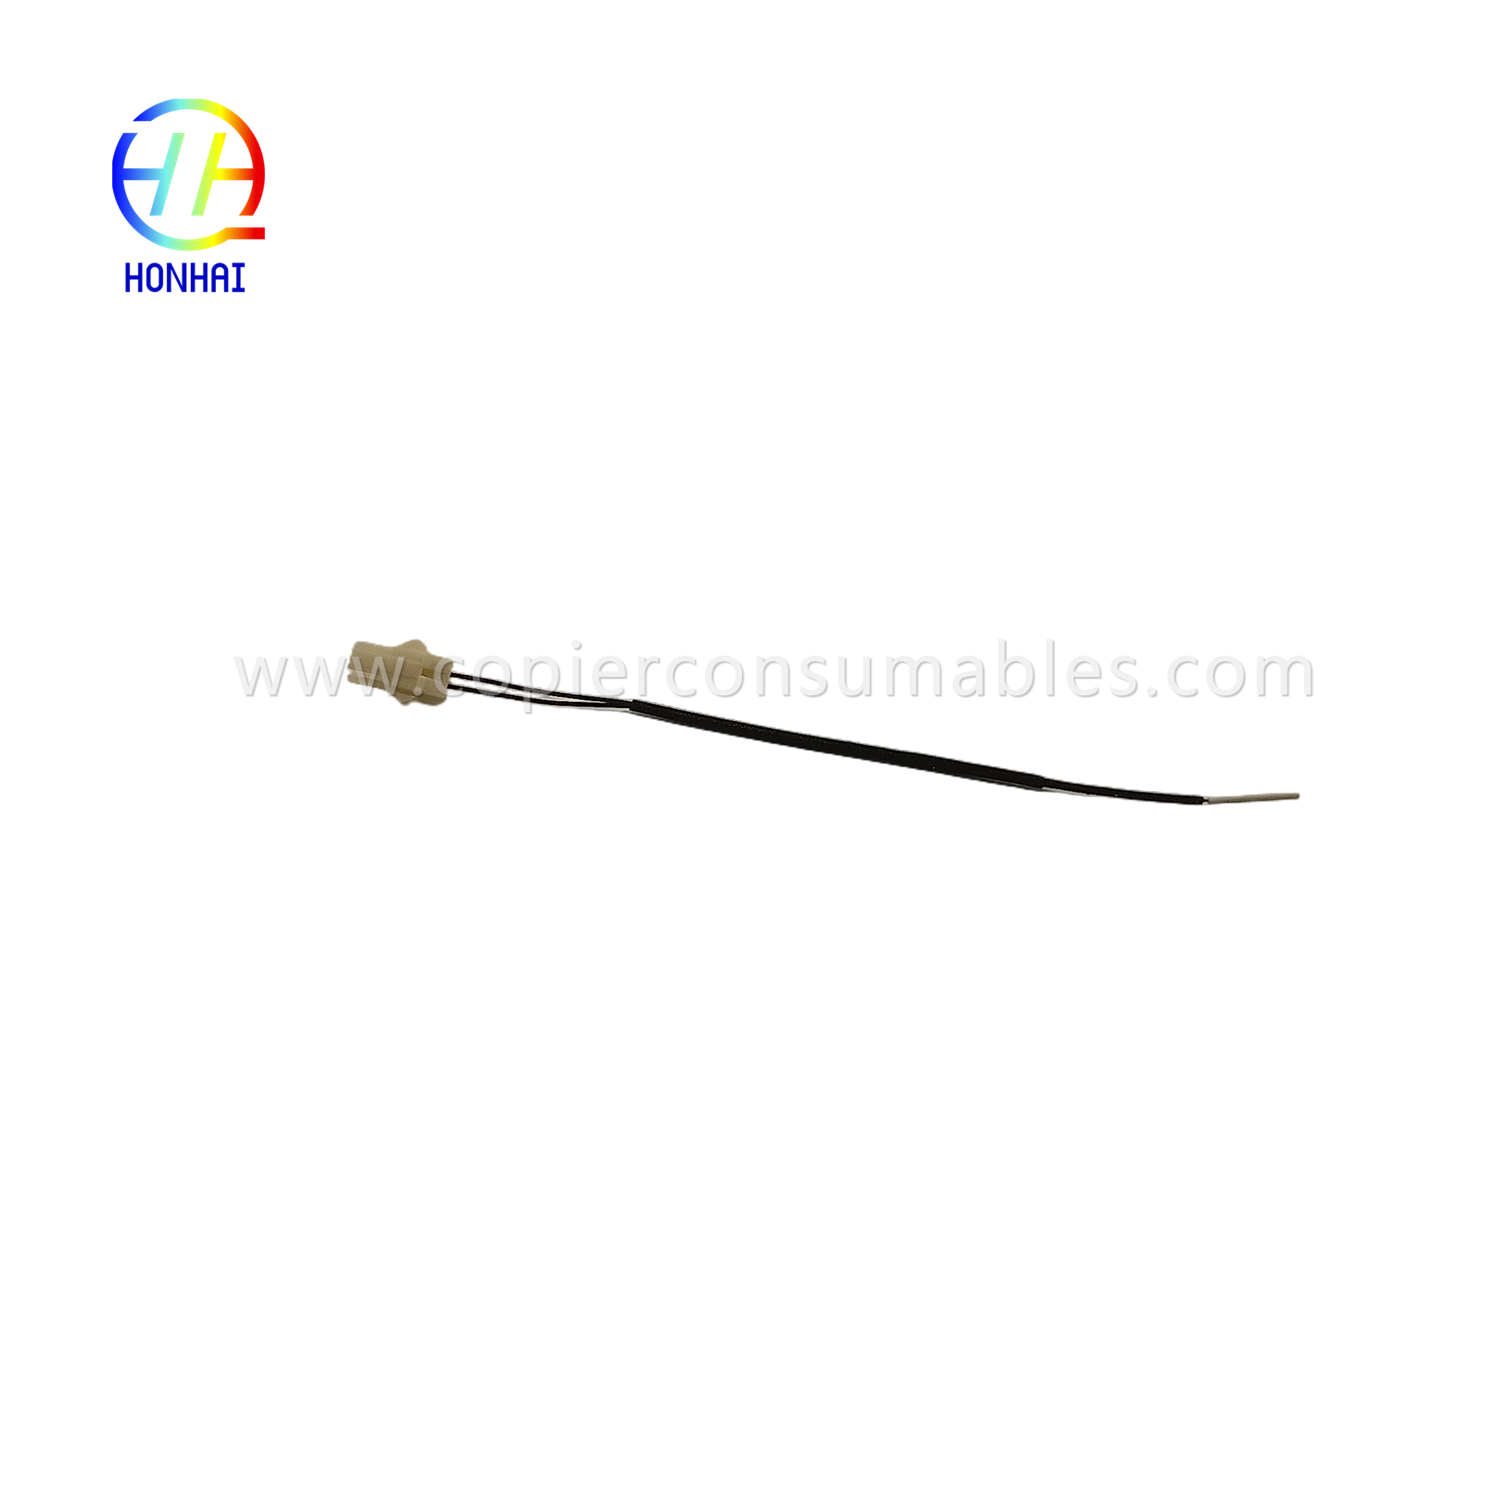 Fuser Thermistor mo OCE 9400 TDS300 TDS750 PW300 350